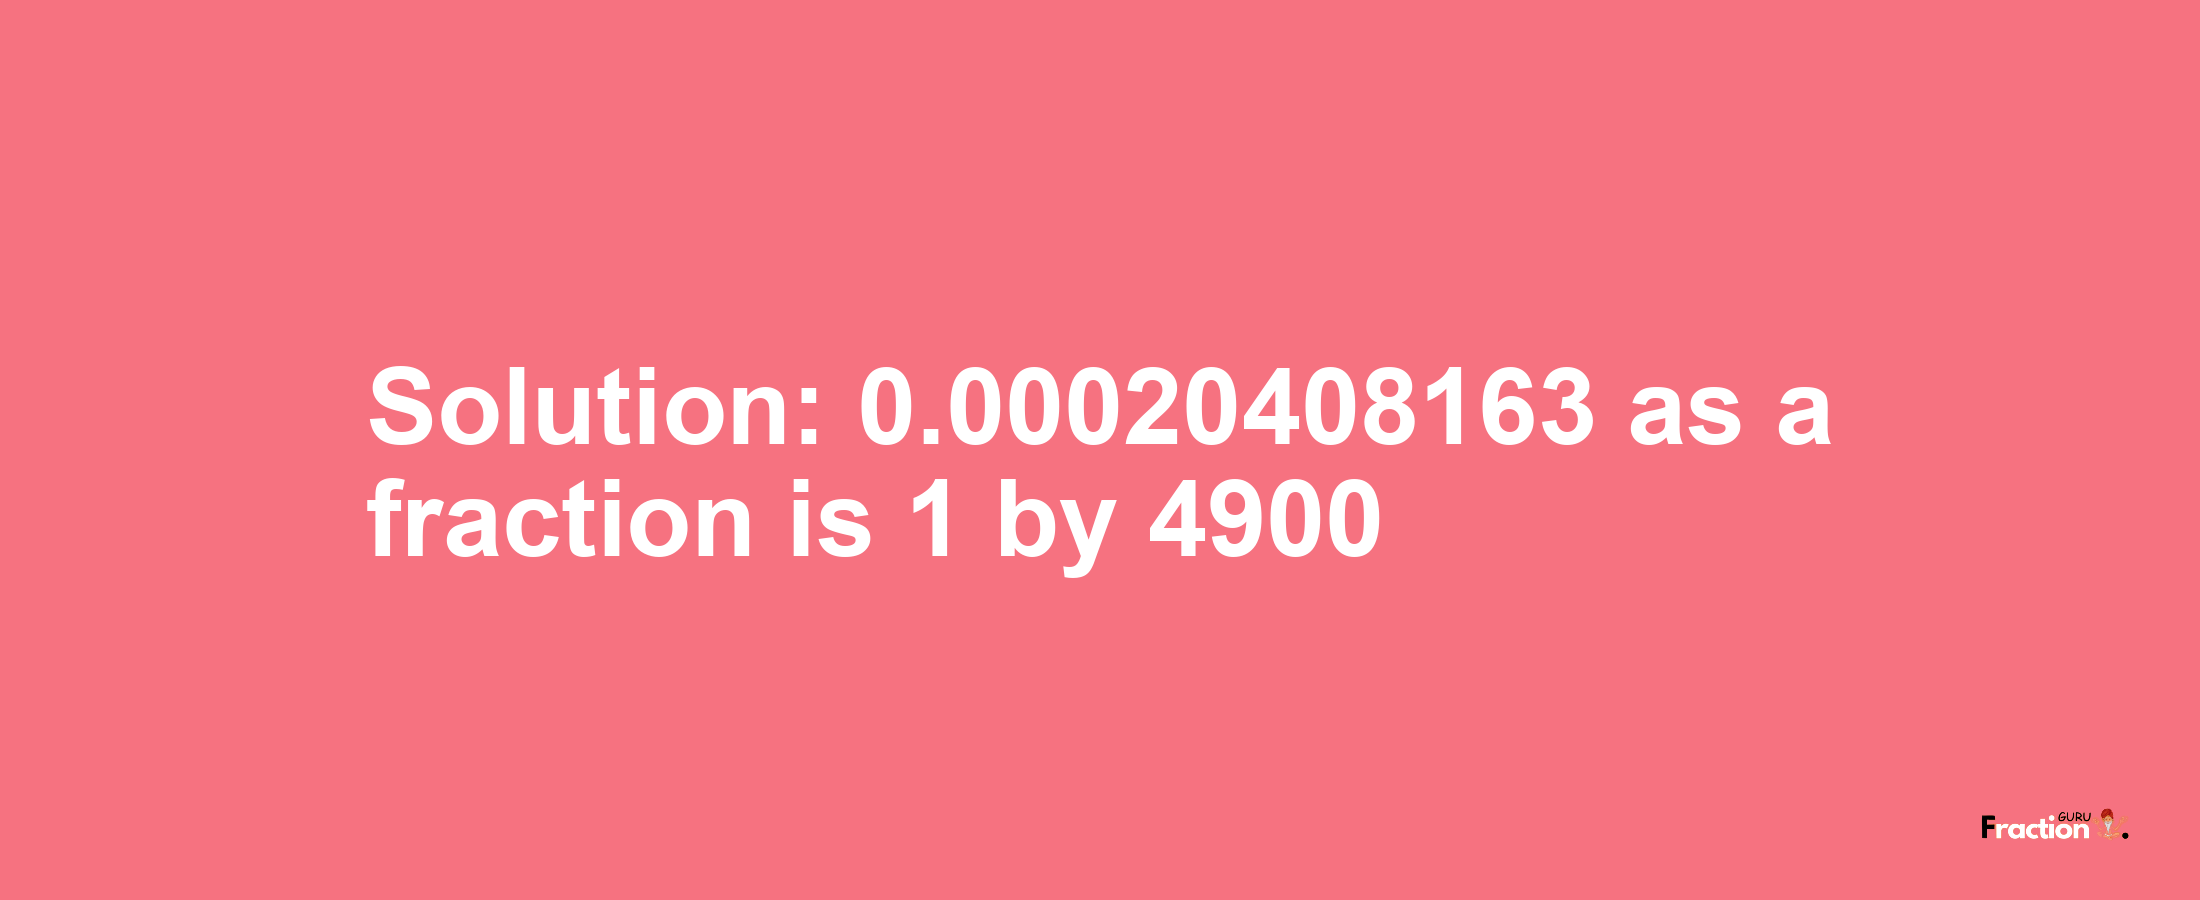 Solution:0.00020408163 as a fraction is 1/4900